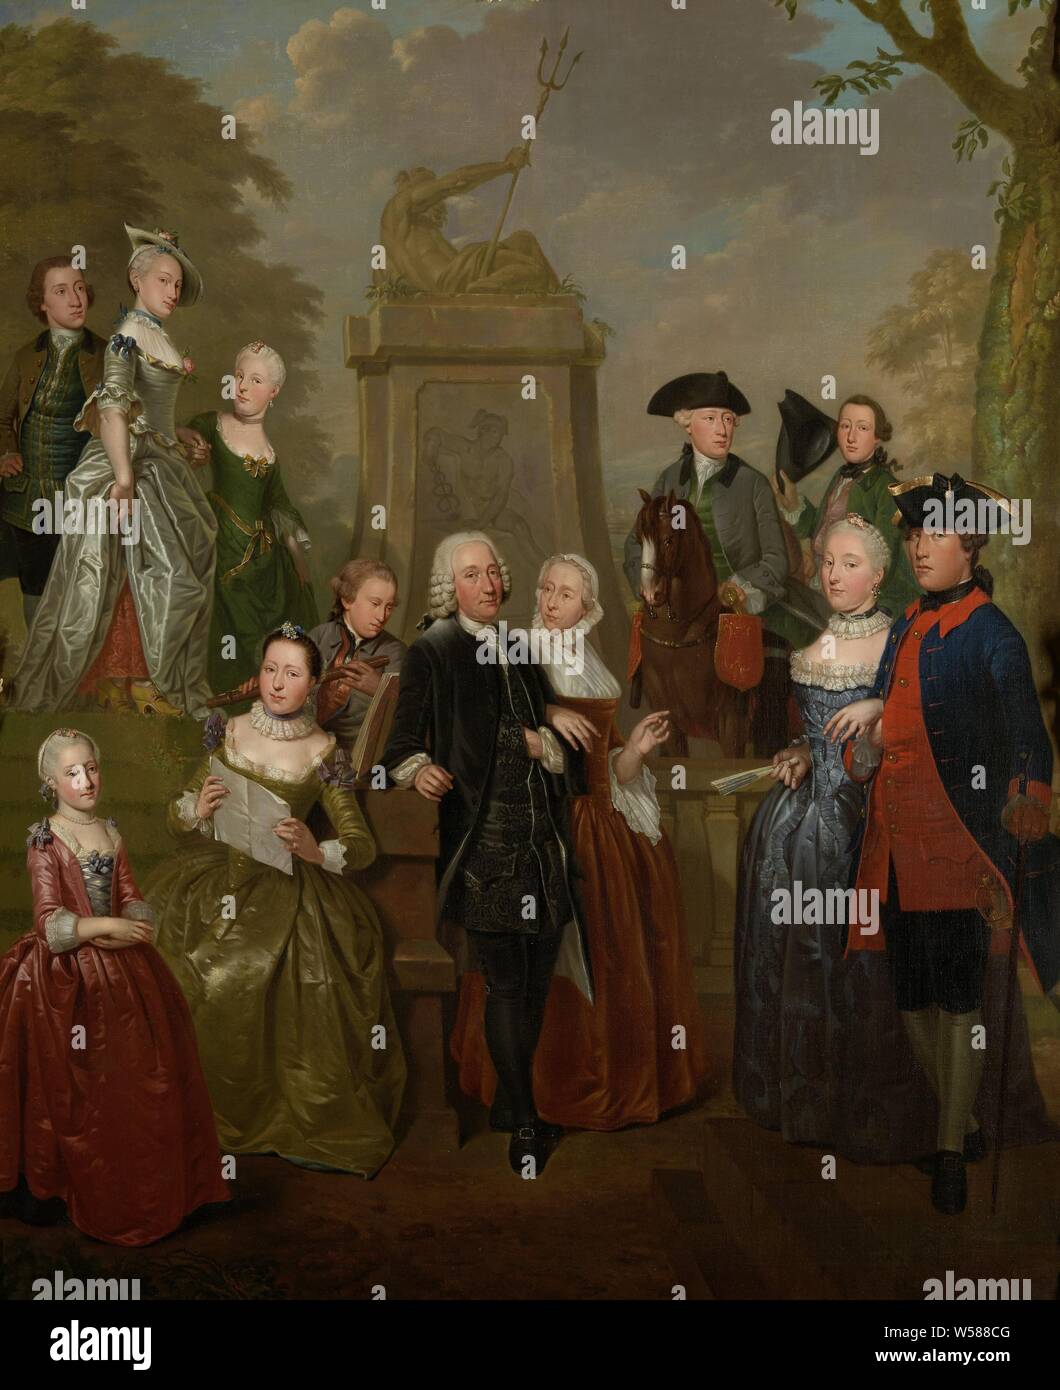 Portrait of Theodorus Diocese of Vliet and his Family Portrait of Theodorus Diocese of Vliet and his family, Portrait of Theodorus Diocese of Vliet (1698-1777), mayor of Haastrecht and Water Board of the Krimpenerwaard, with his family on a terrace in the garden of his house in Haastrecht for a statue with Neptune and Mercury. The following are also depicted: his wife Maria van Harthals (1703-63) and his children top left: Cornelis (1737-73), Maria Theodora (1739-1828) and Adriana Elisabeth (1742-76), bottom left: Agatha (1743-76) Johanna Margaretha (1735-64) and Johan de Wijs (1740-62), Stock Photo